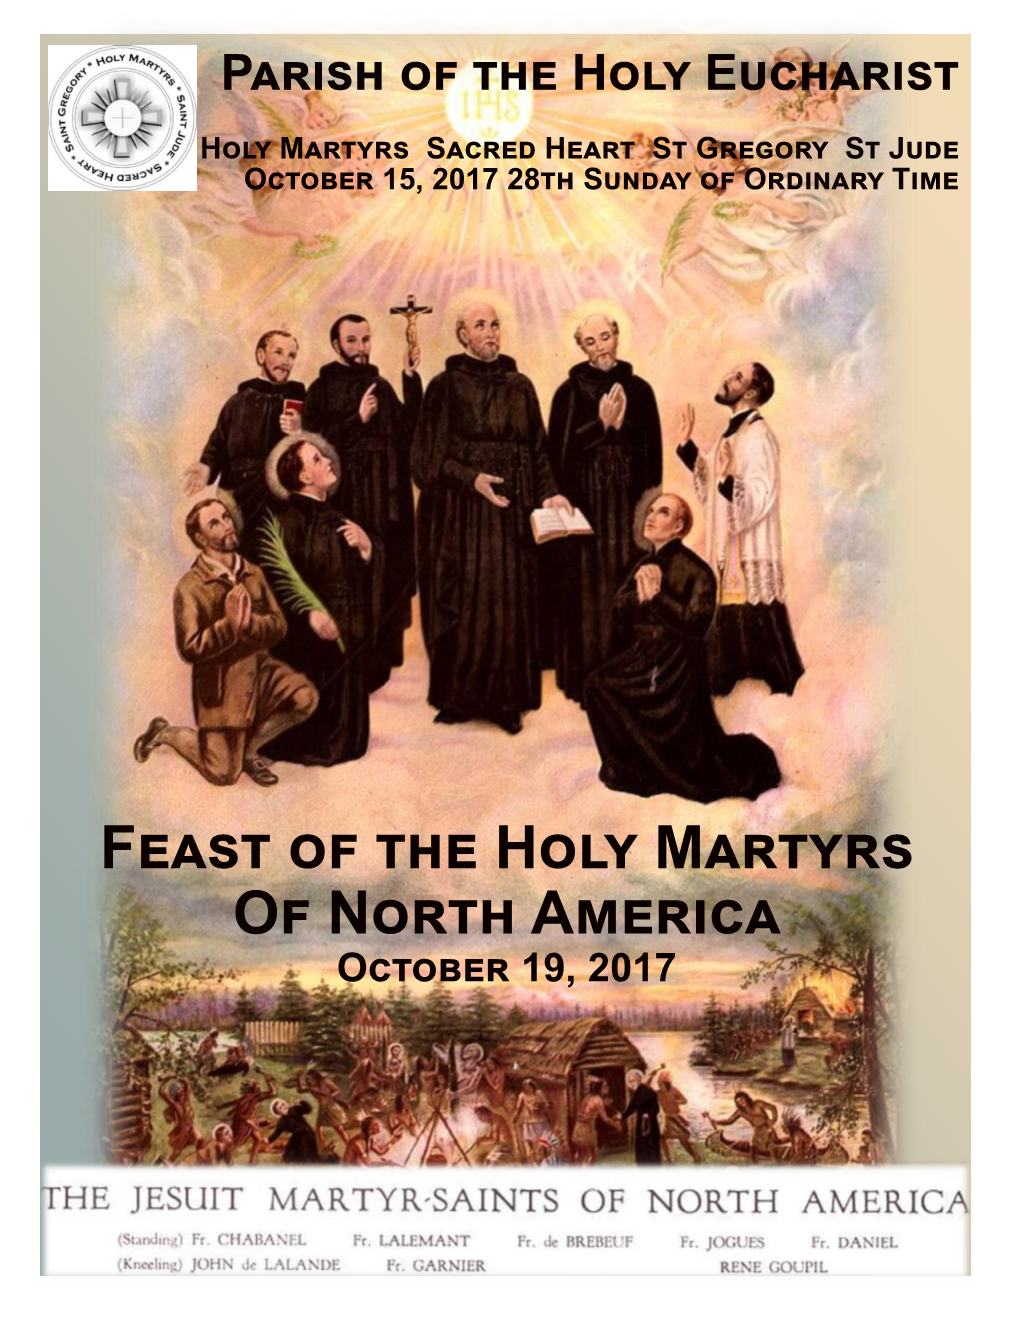 Feast of the Holy Martyrs of North America October 19, 2017